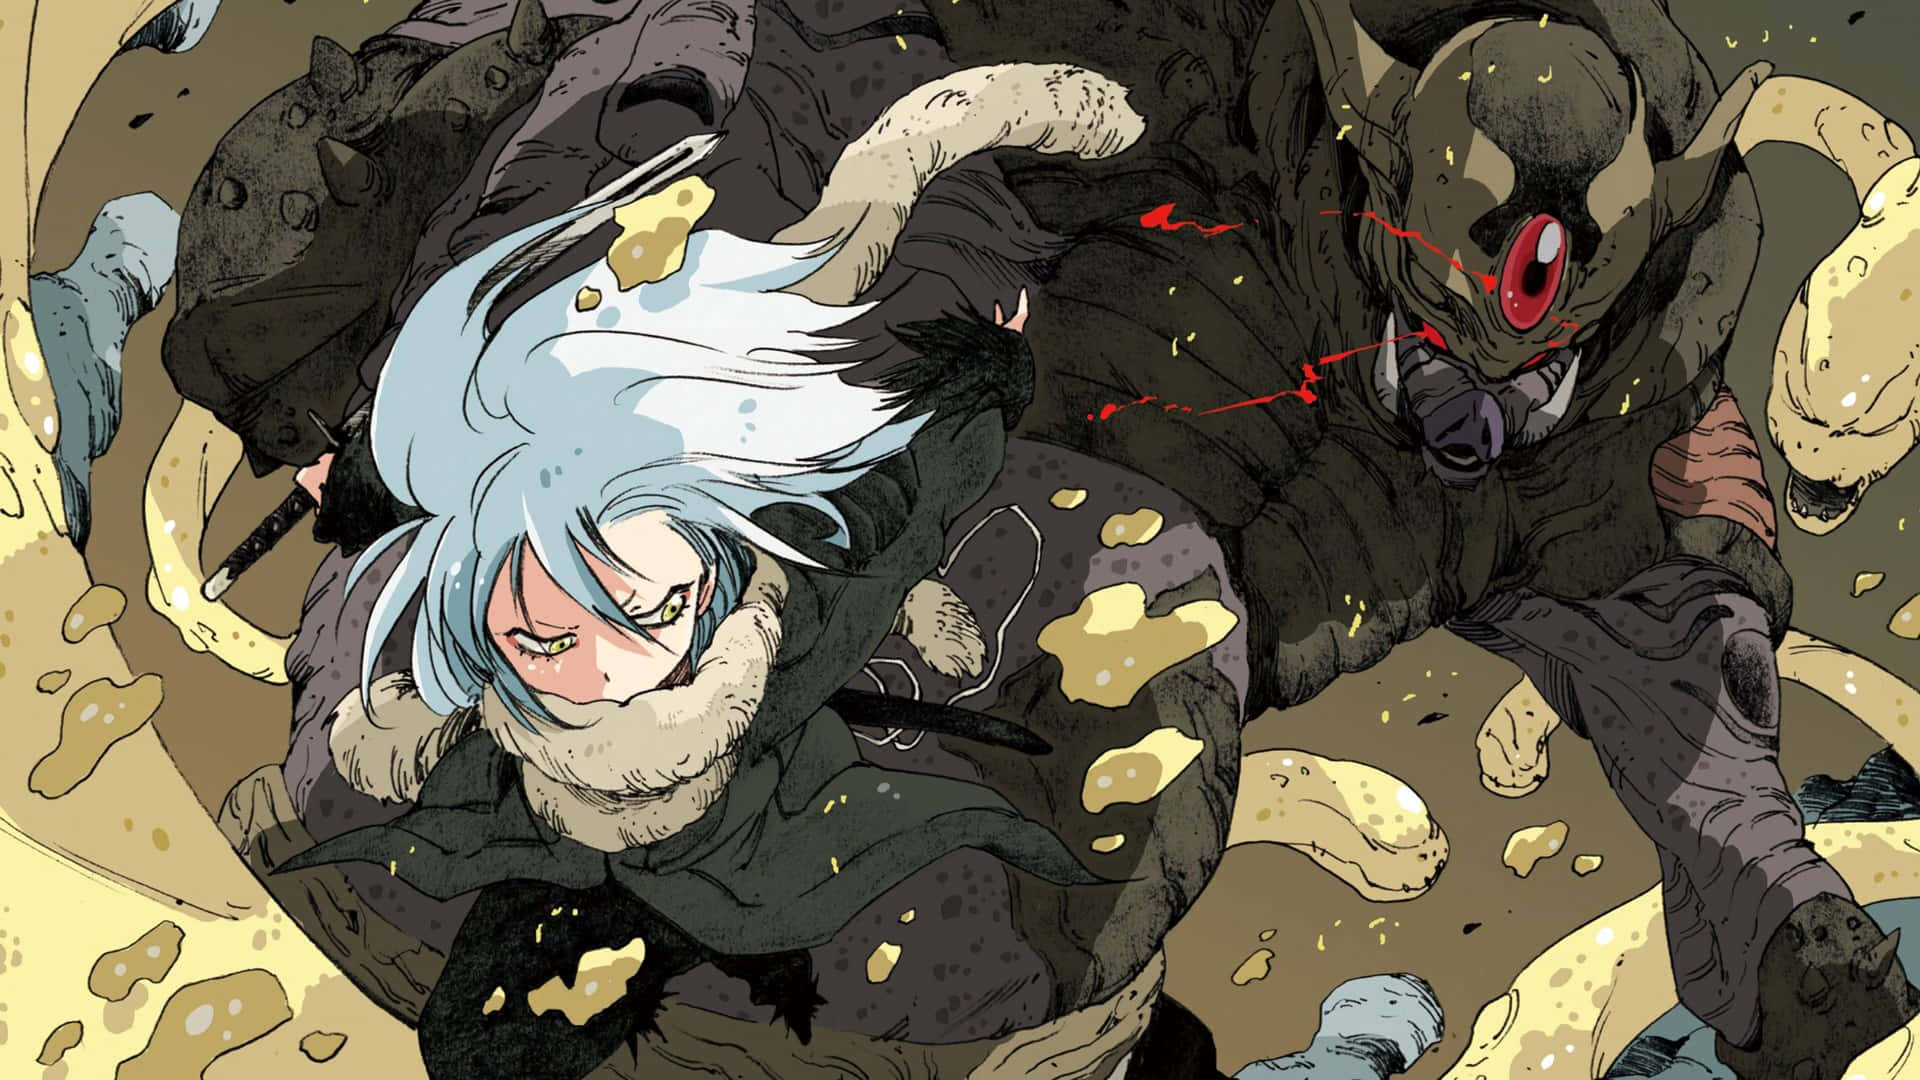 Don't let his slimy appearance fool you - Rimuru is a powerful force to be reckoned with